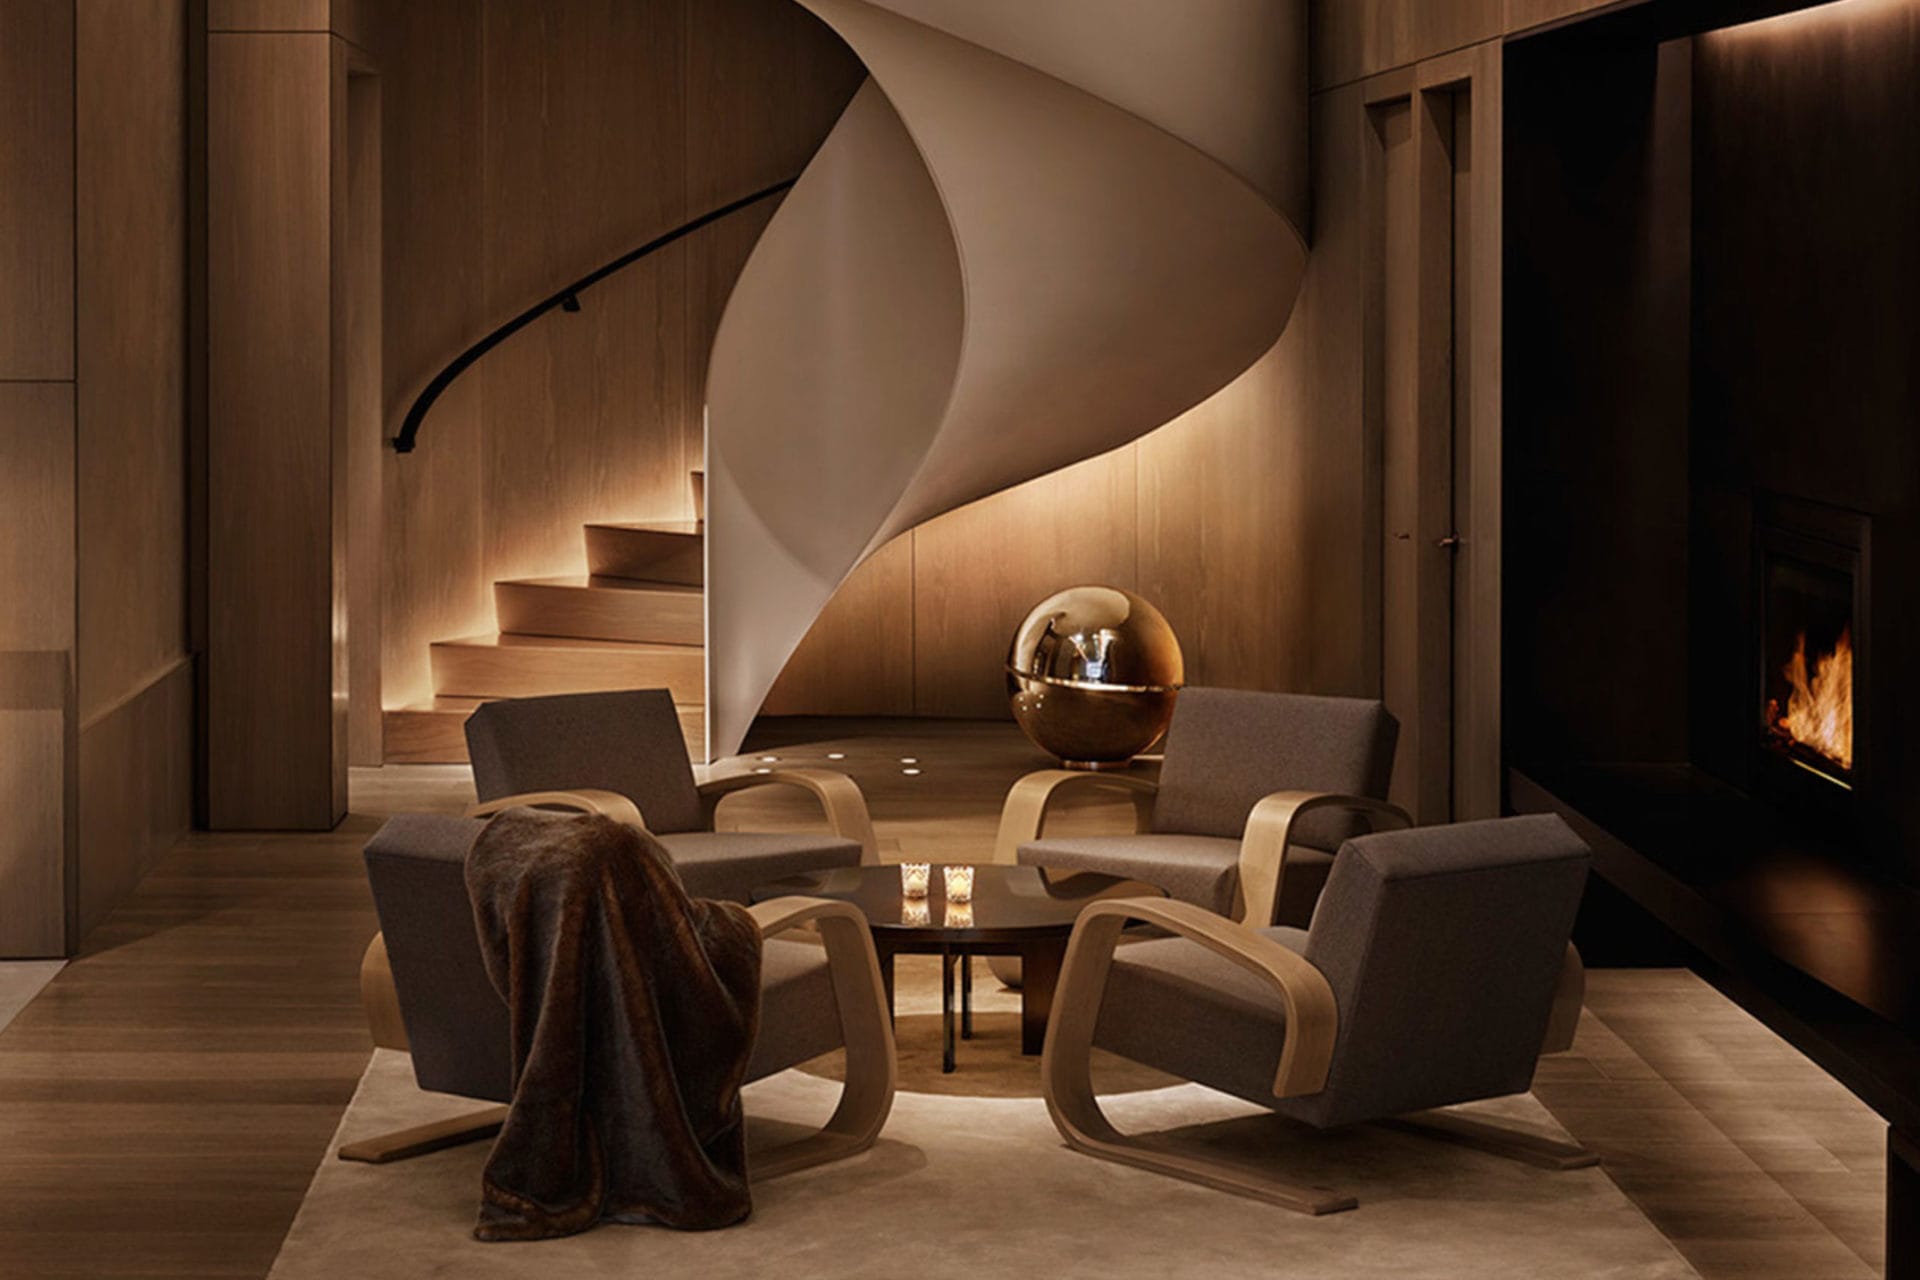 a custom SENTIENT contemporary coffee table with four chairs in a new york edition hotel setting with spiral staircase